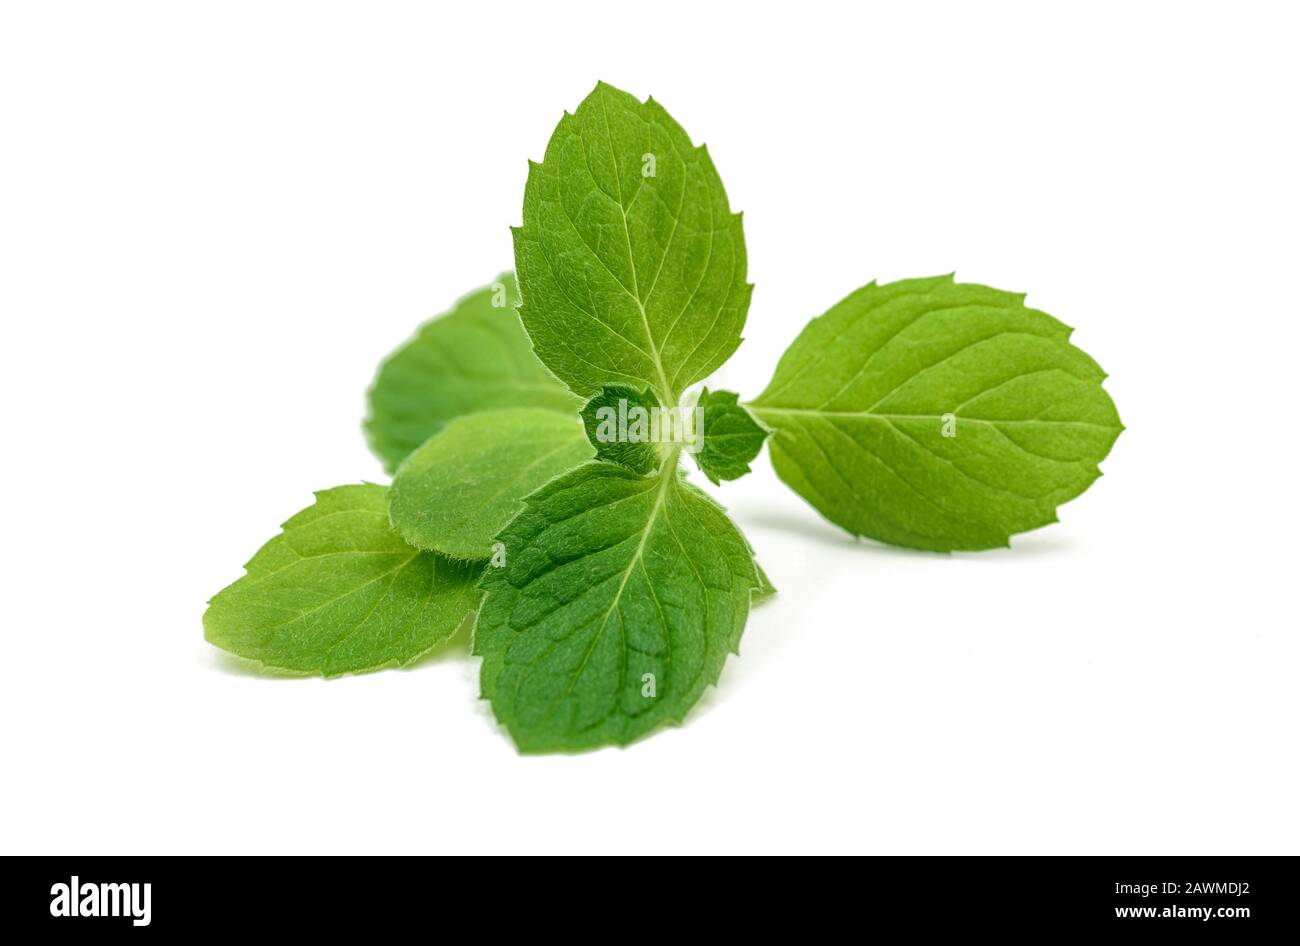 Mint leaf isolated over white background Stock Photo